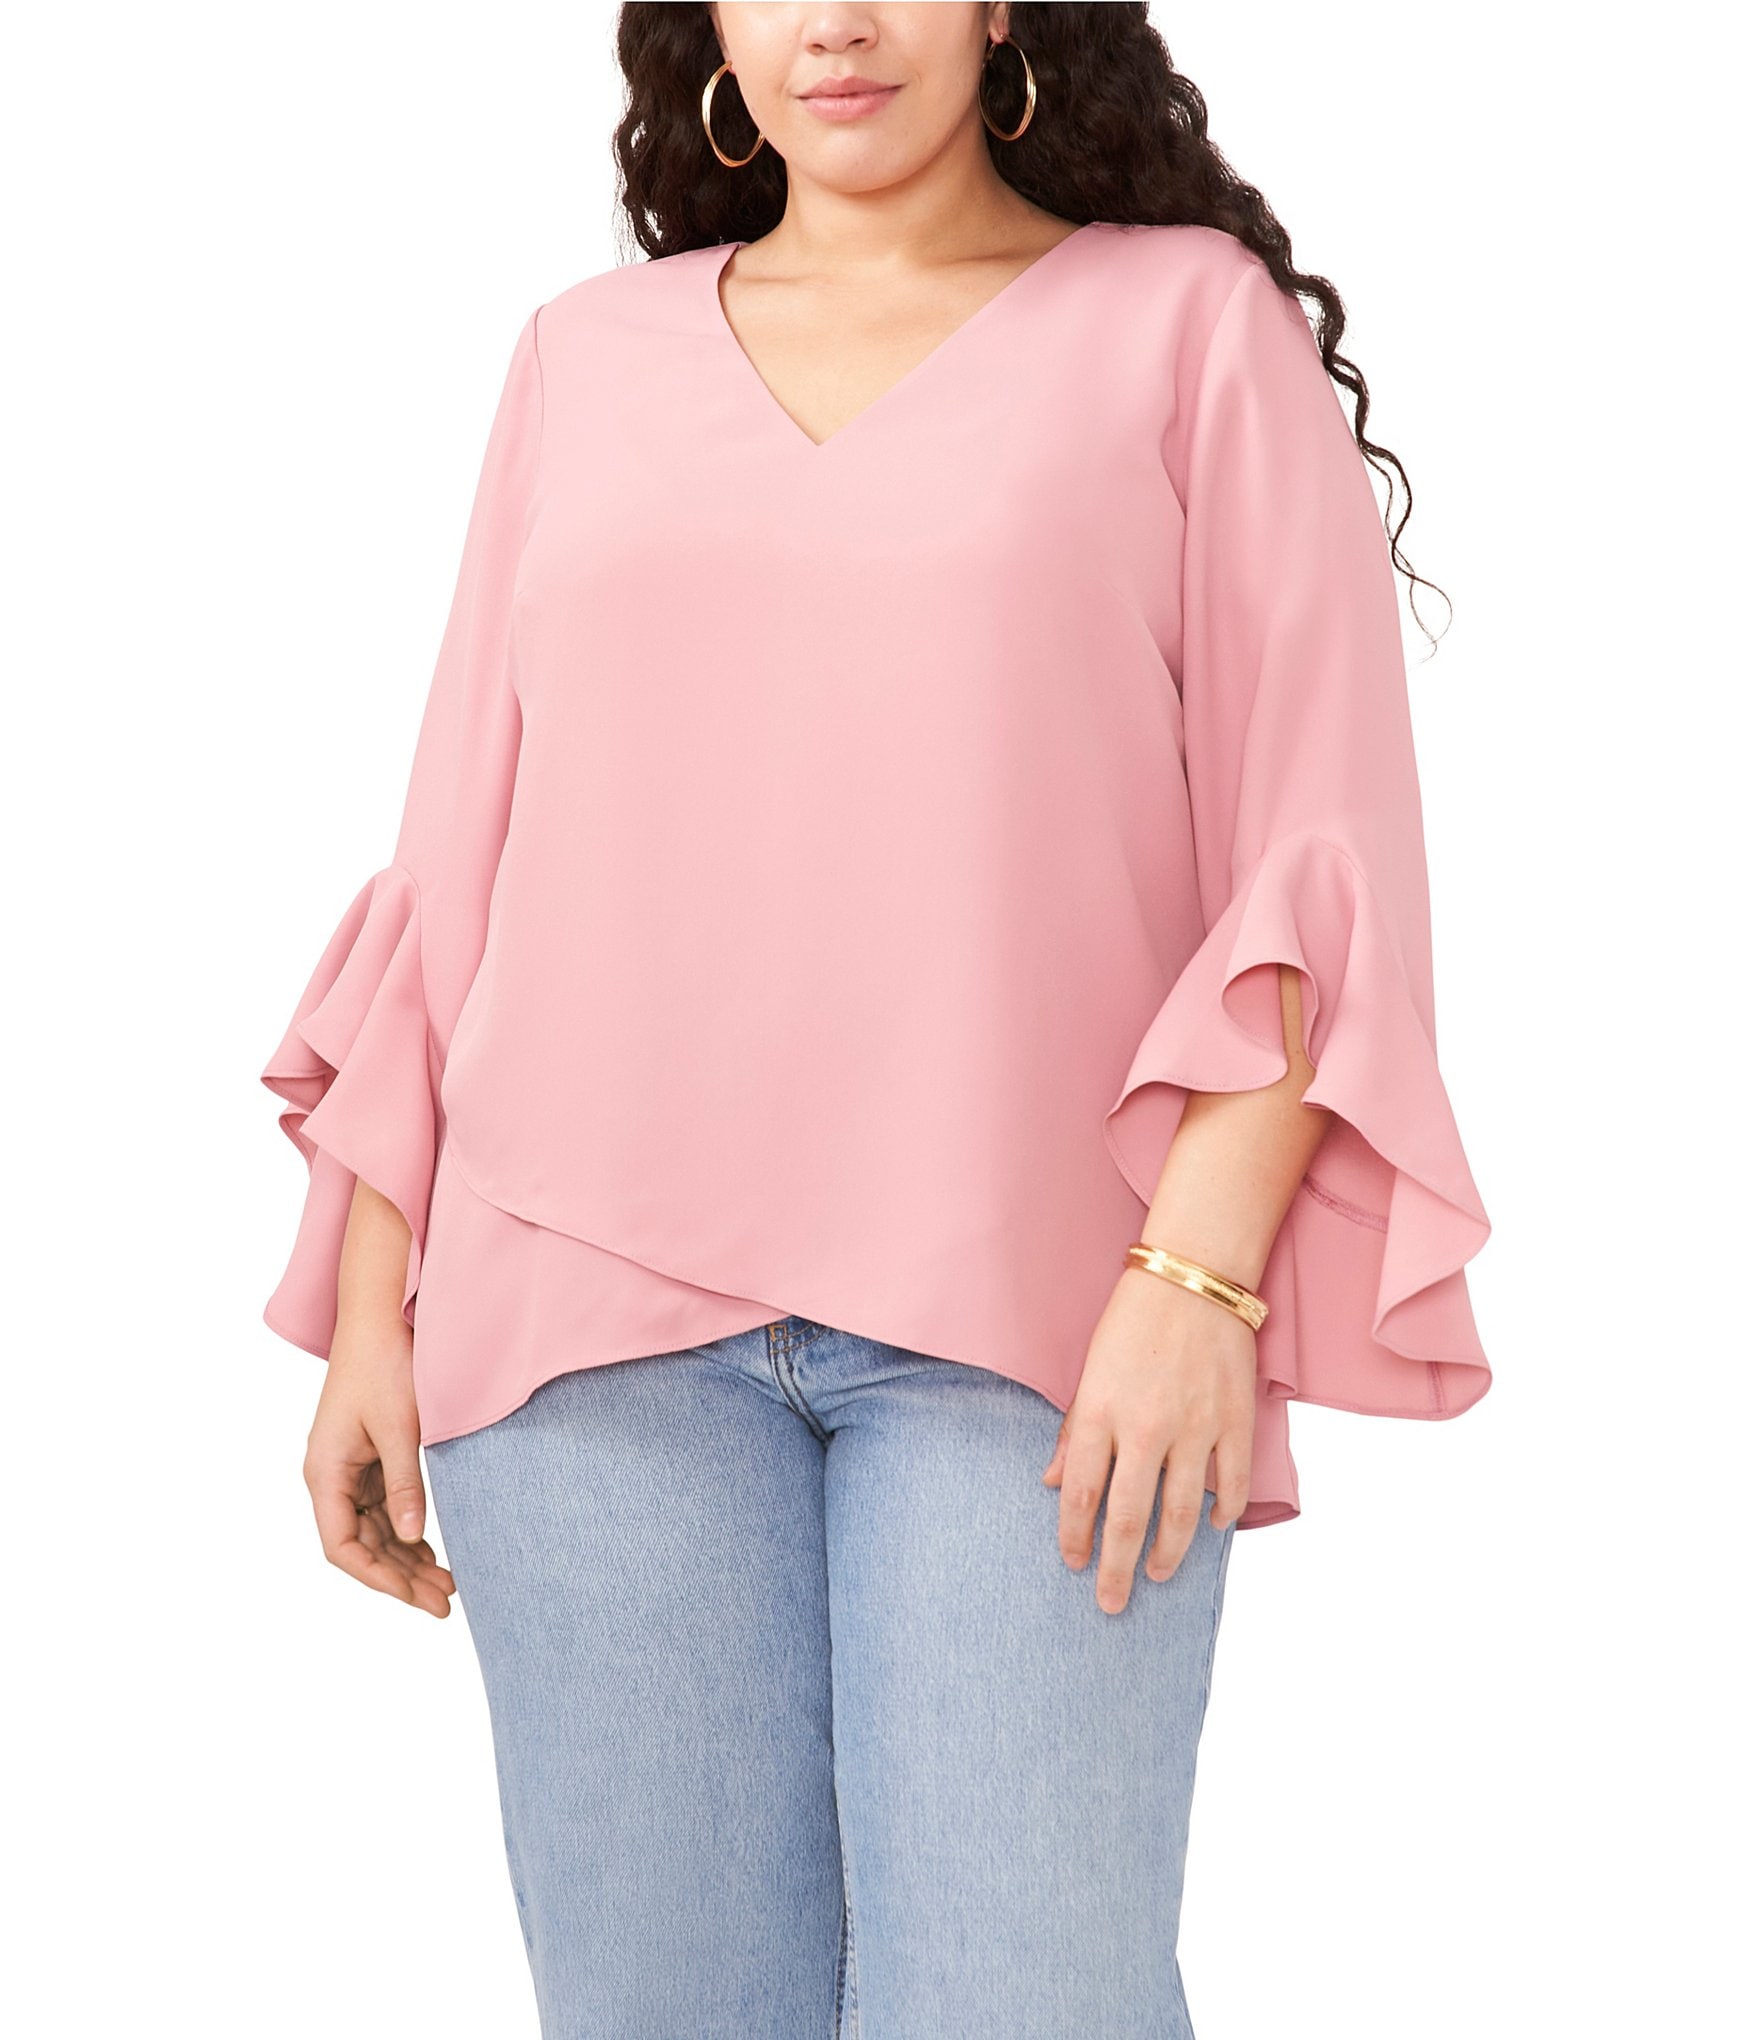 Red Plus-Size Casual & Dressy Blouses